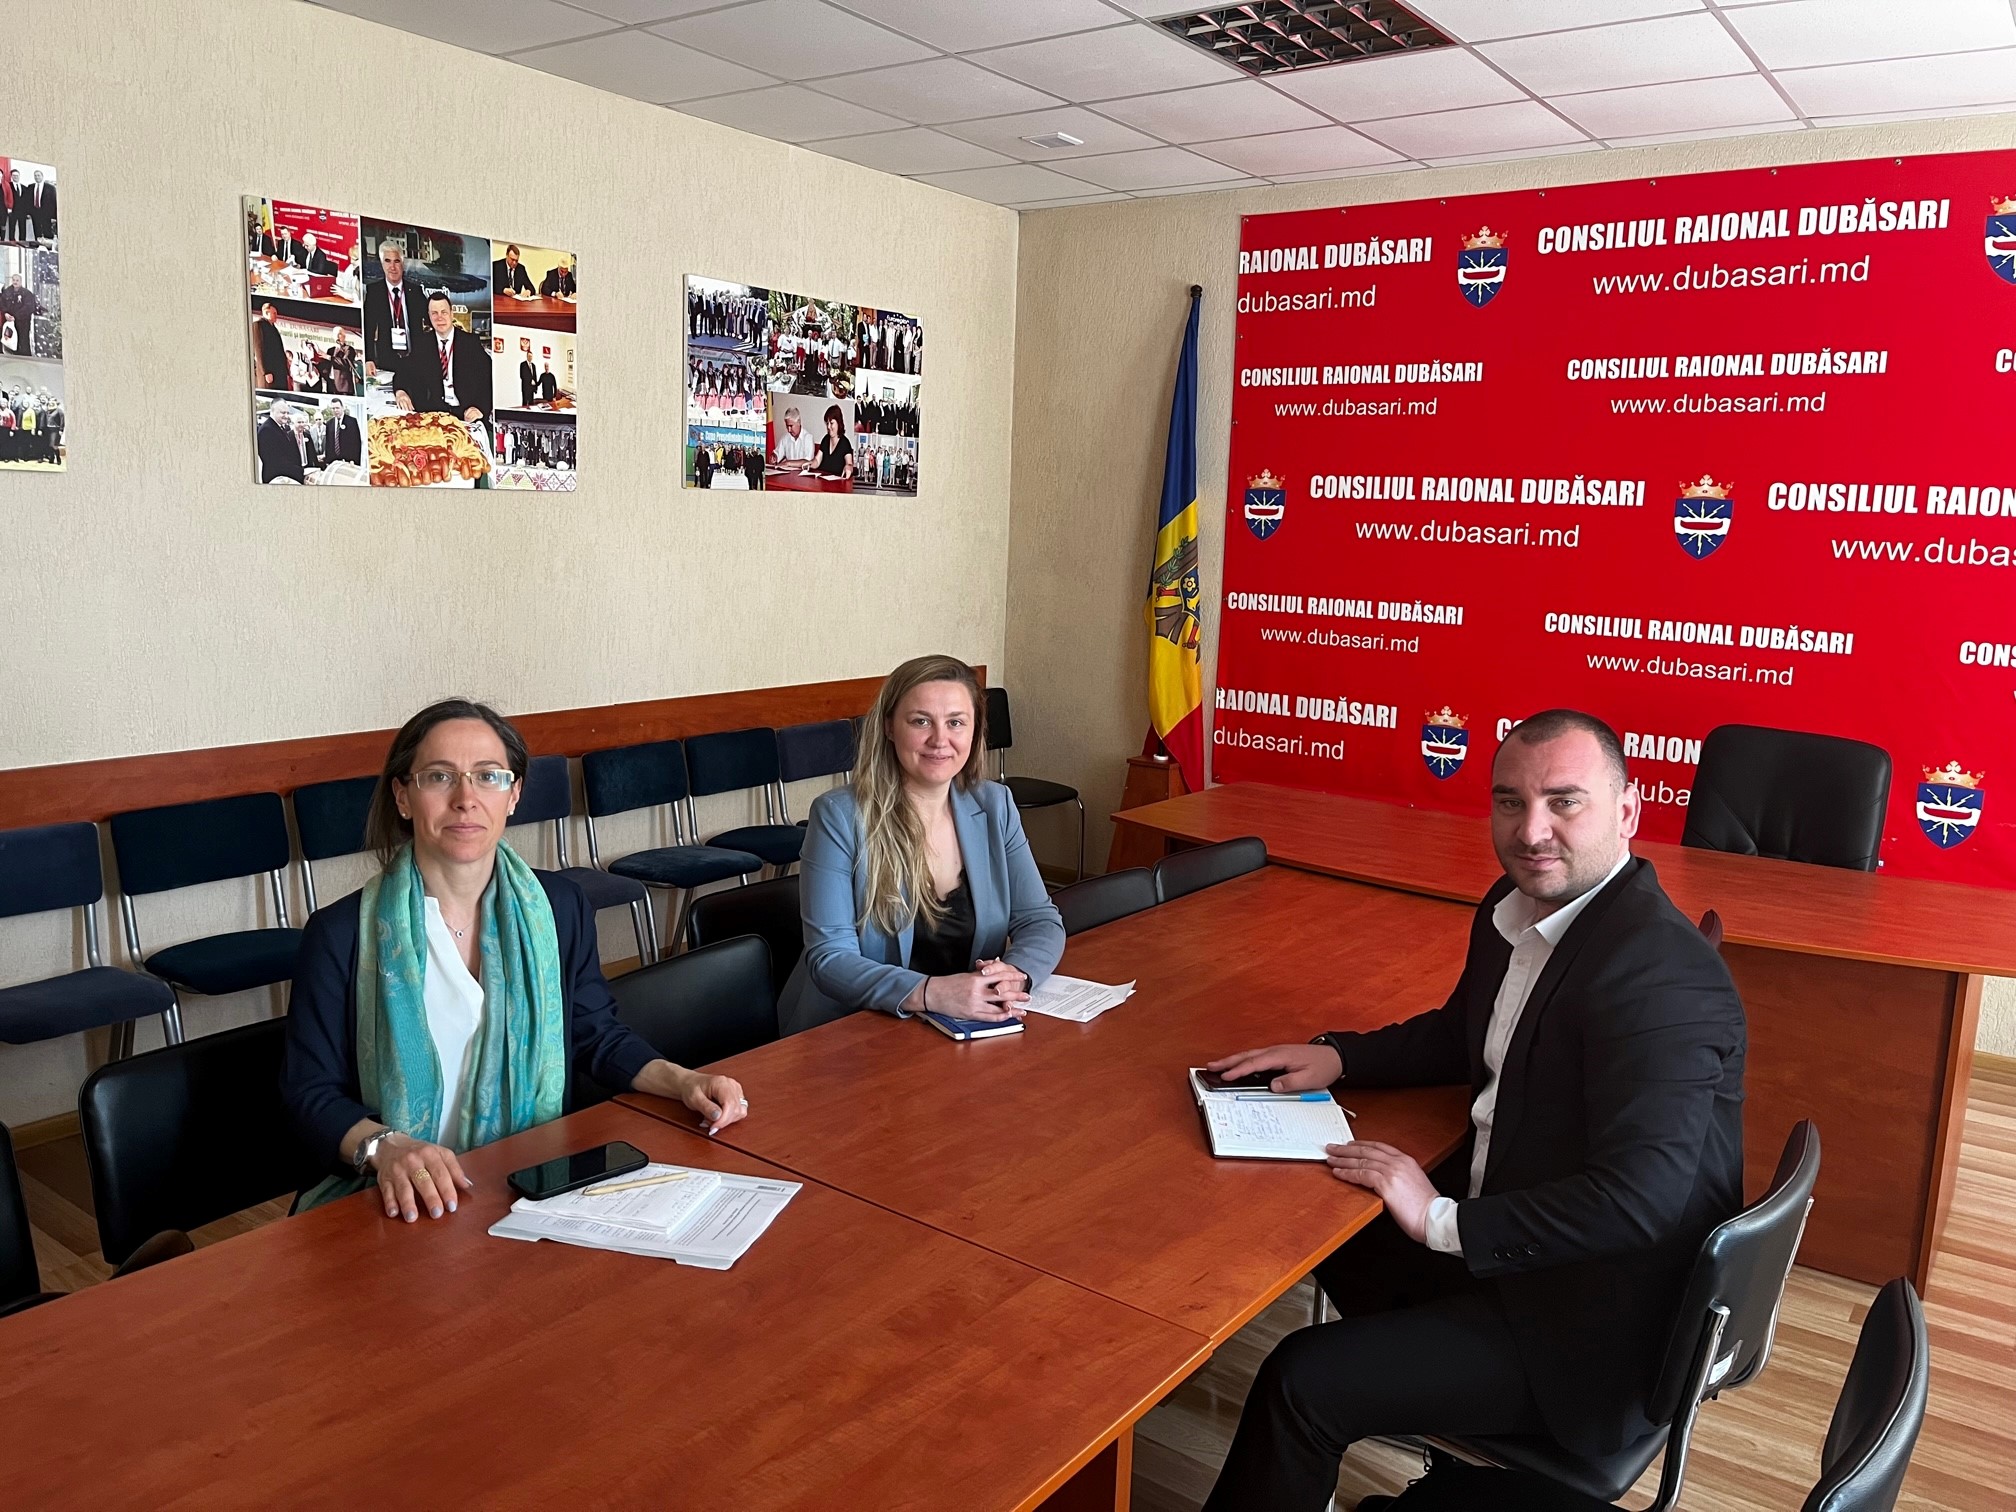 Cooperation with local authorities in the Republic of Moldova on non-discrimination and protection of vulnerable groups